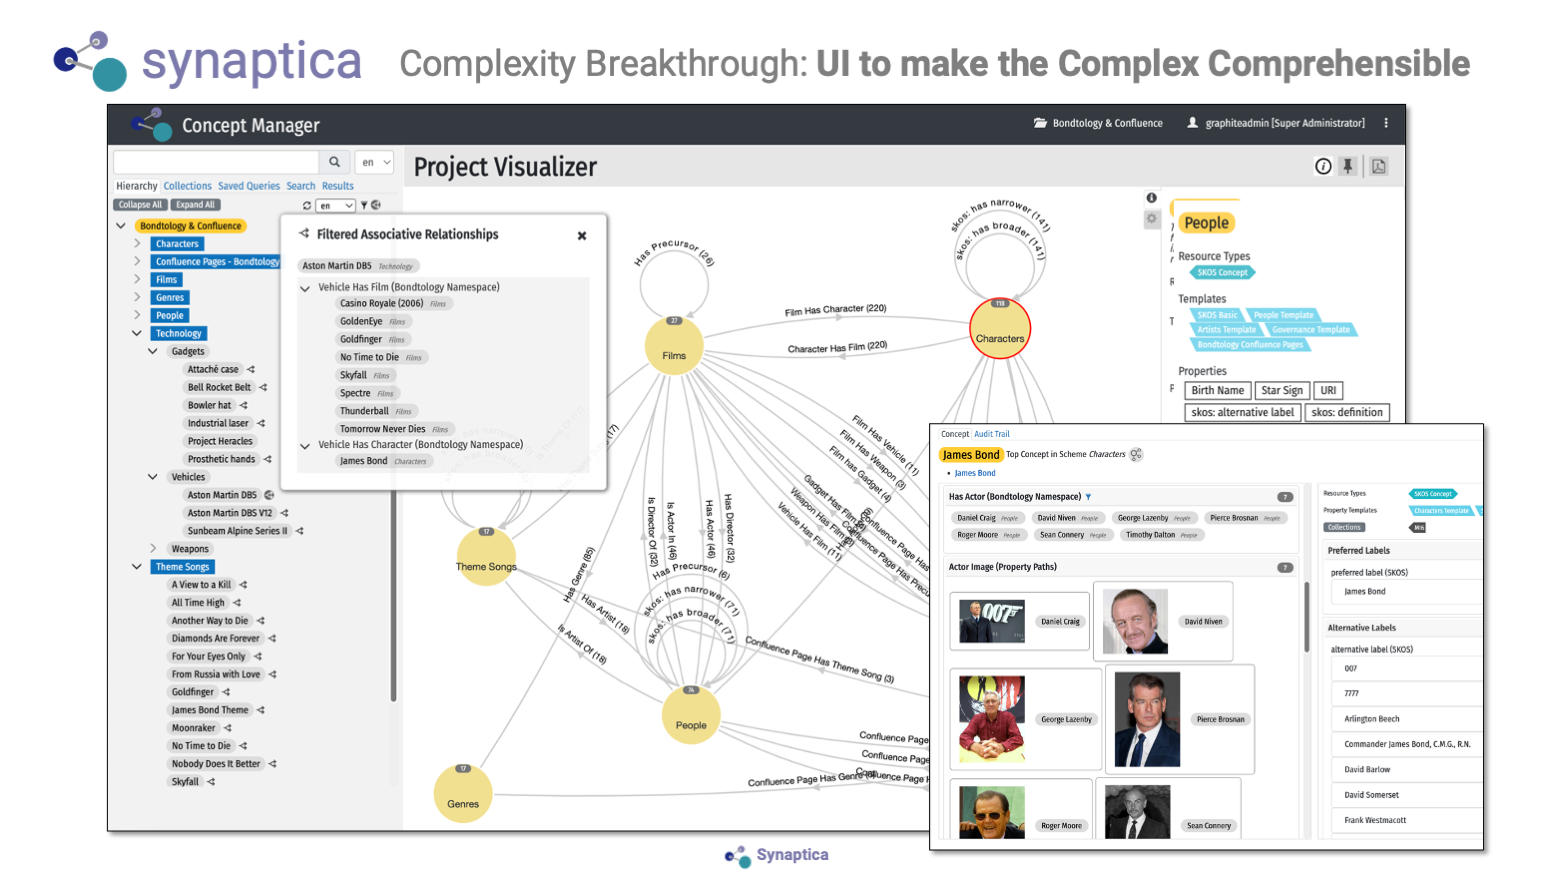 Presentation Slide | Complexity Breakthrough: UI to make the Complex Comprehensible